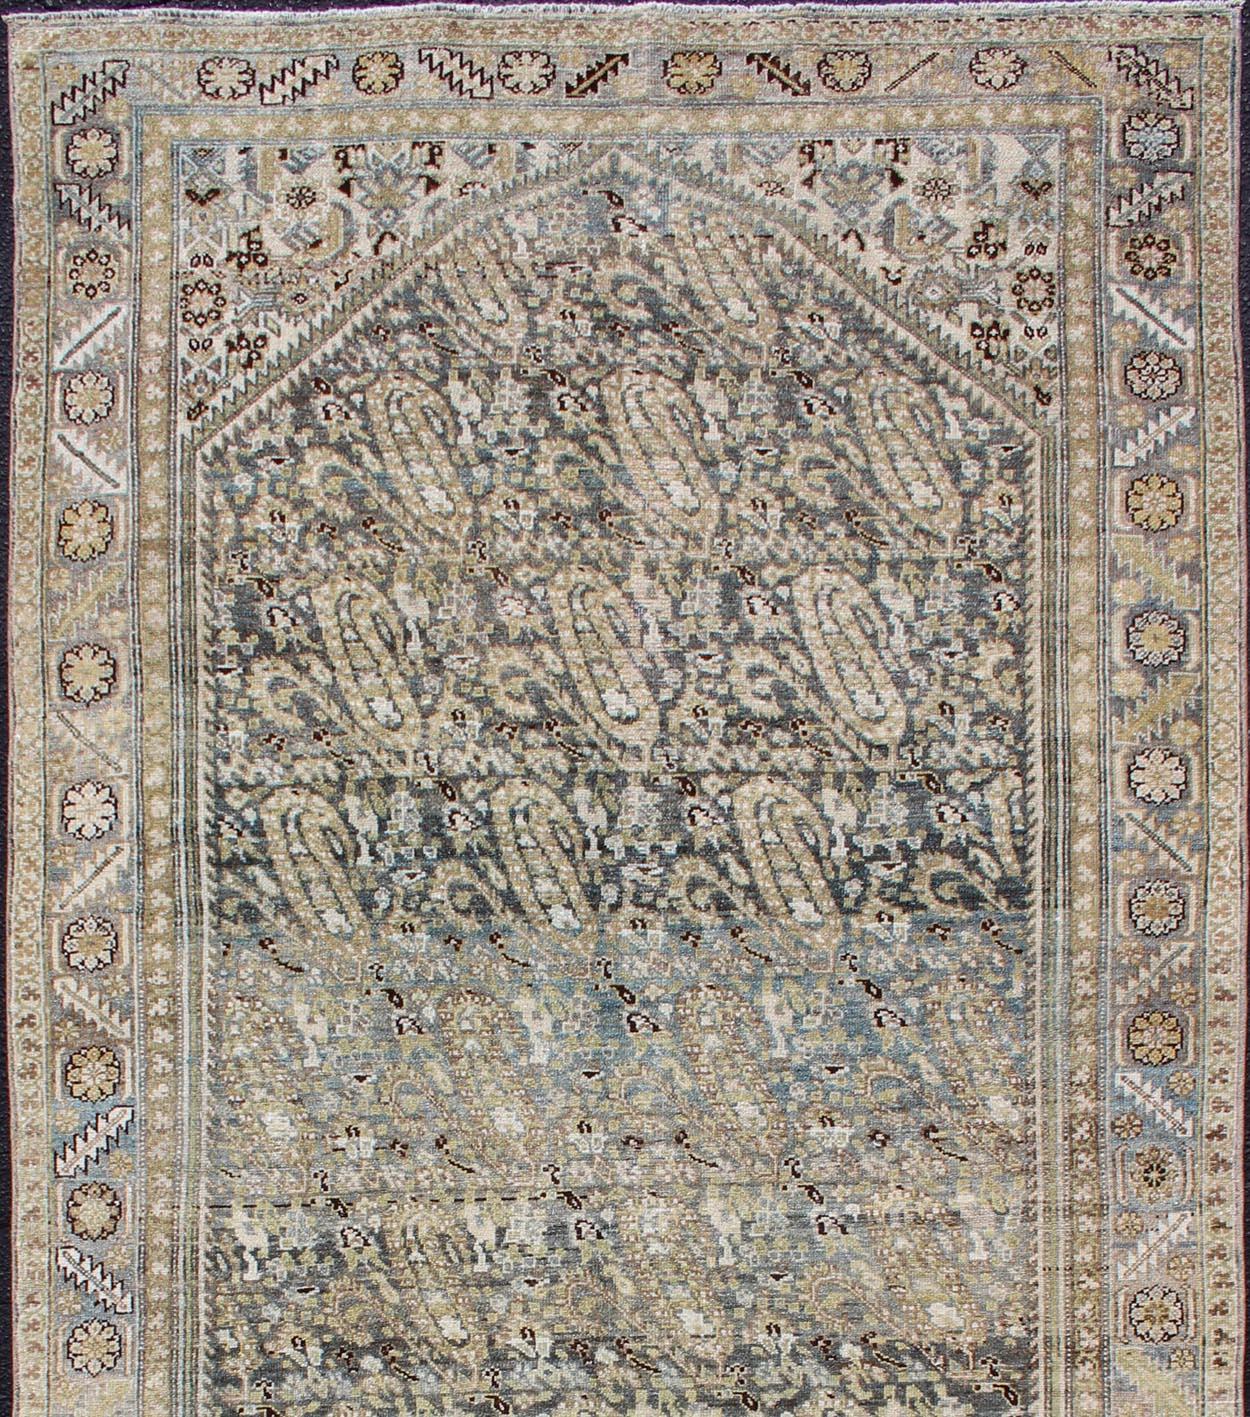 All-over motif paisley design Persian Malayer Gallery rug antique in tones of gray-blue, gray , light blue rug SUS-2002-659, country of origin / type: Iran / Malayer, circa 1910.

This beautiful antique early 20th century Persian Malayer carpet